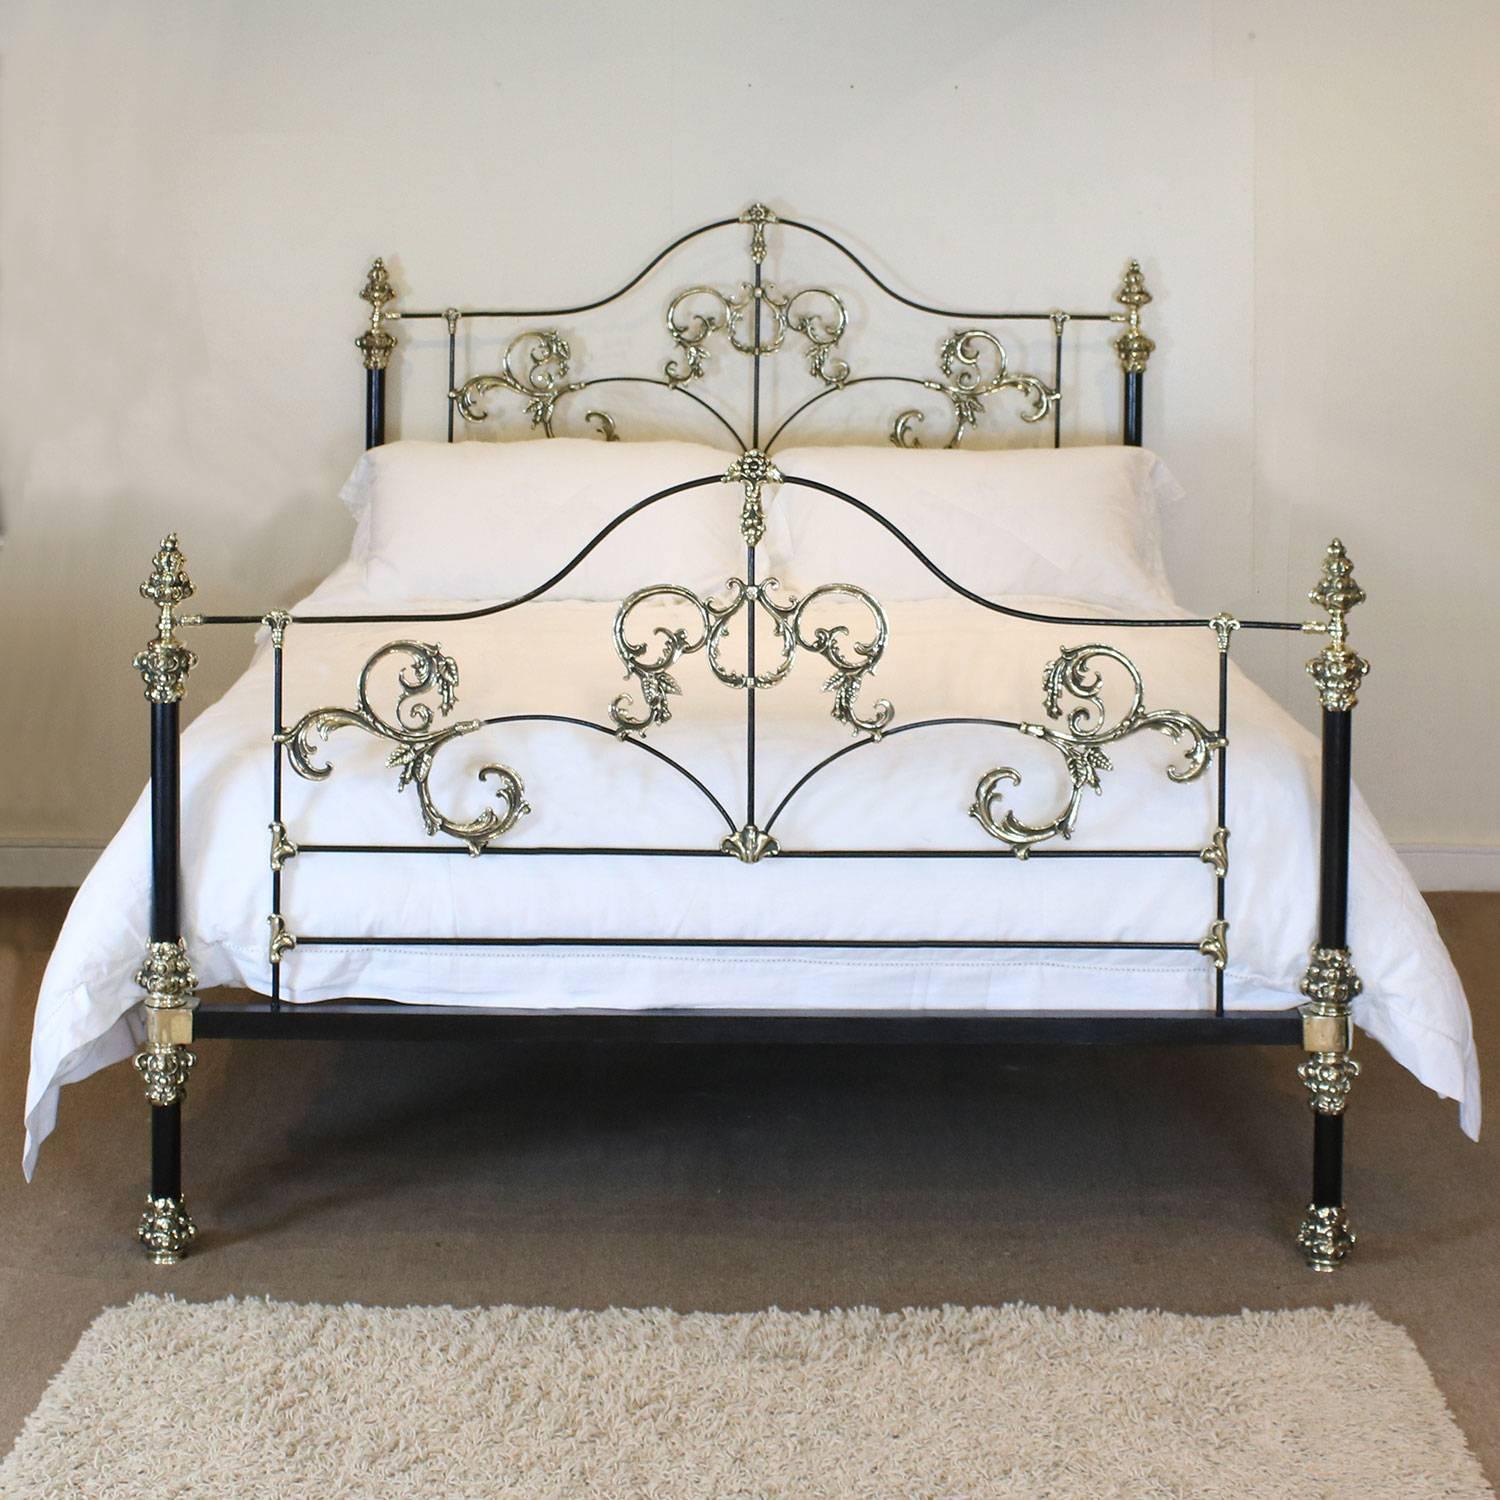 A stunning bespoke made-to-measure brass and iron bed with ornate brass castings, faithfully copying an original antique bed.

The width can be ordered at 60 inches (UK King or US Queen), 72 inches (UK Super King or Californian King) and 76 inches